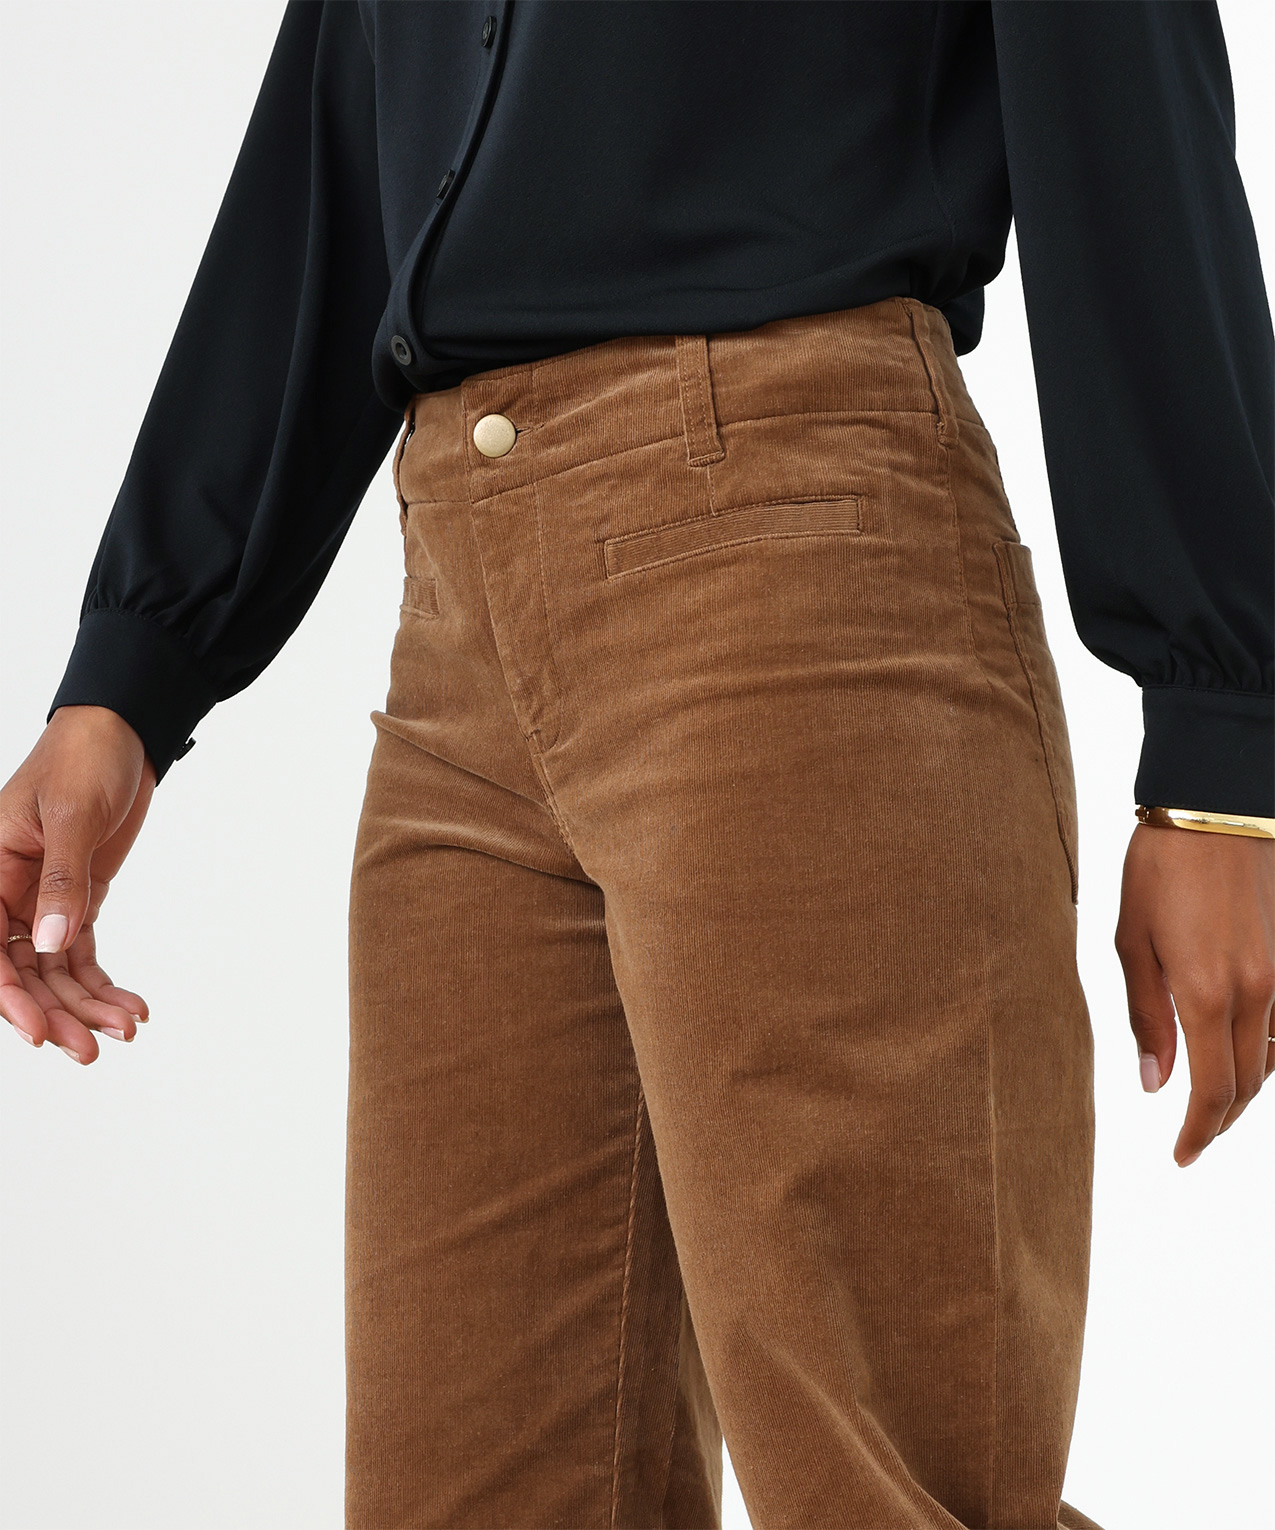 Corduroy Pants For Women Trousers For Women High Waisted Brown